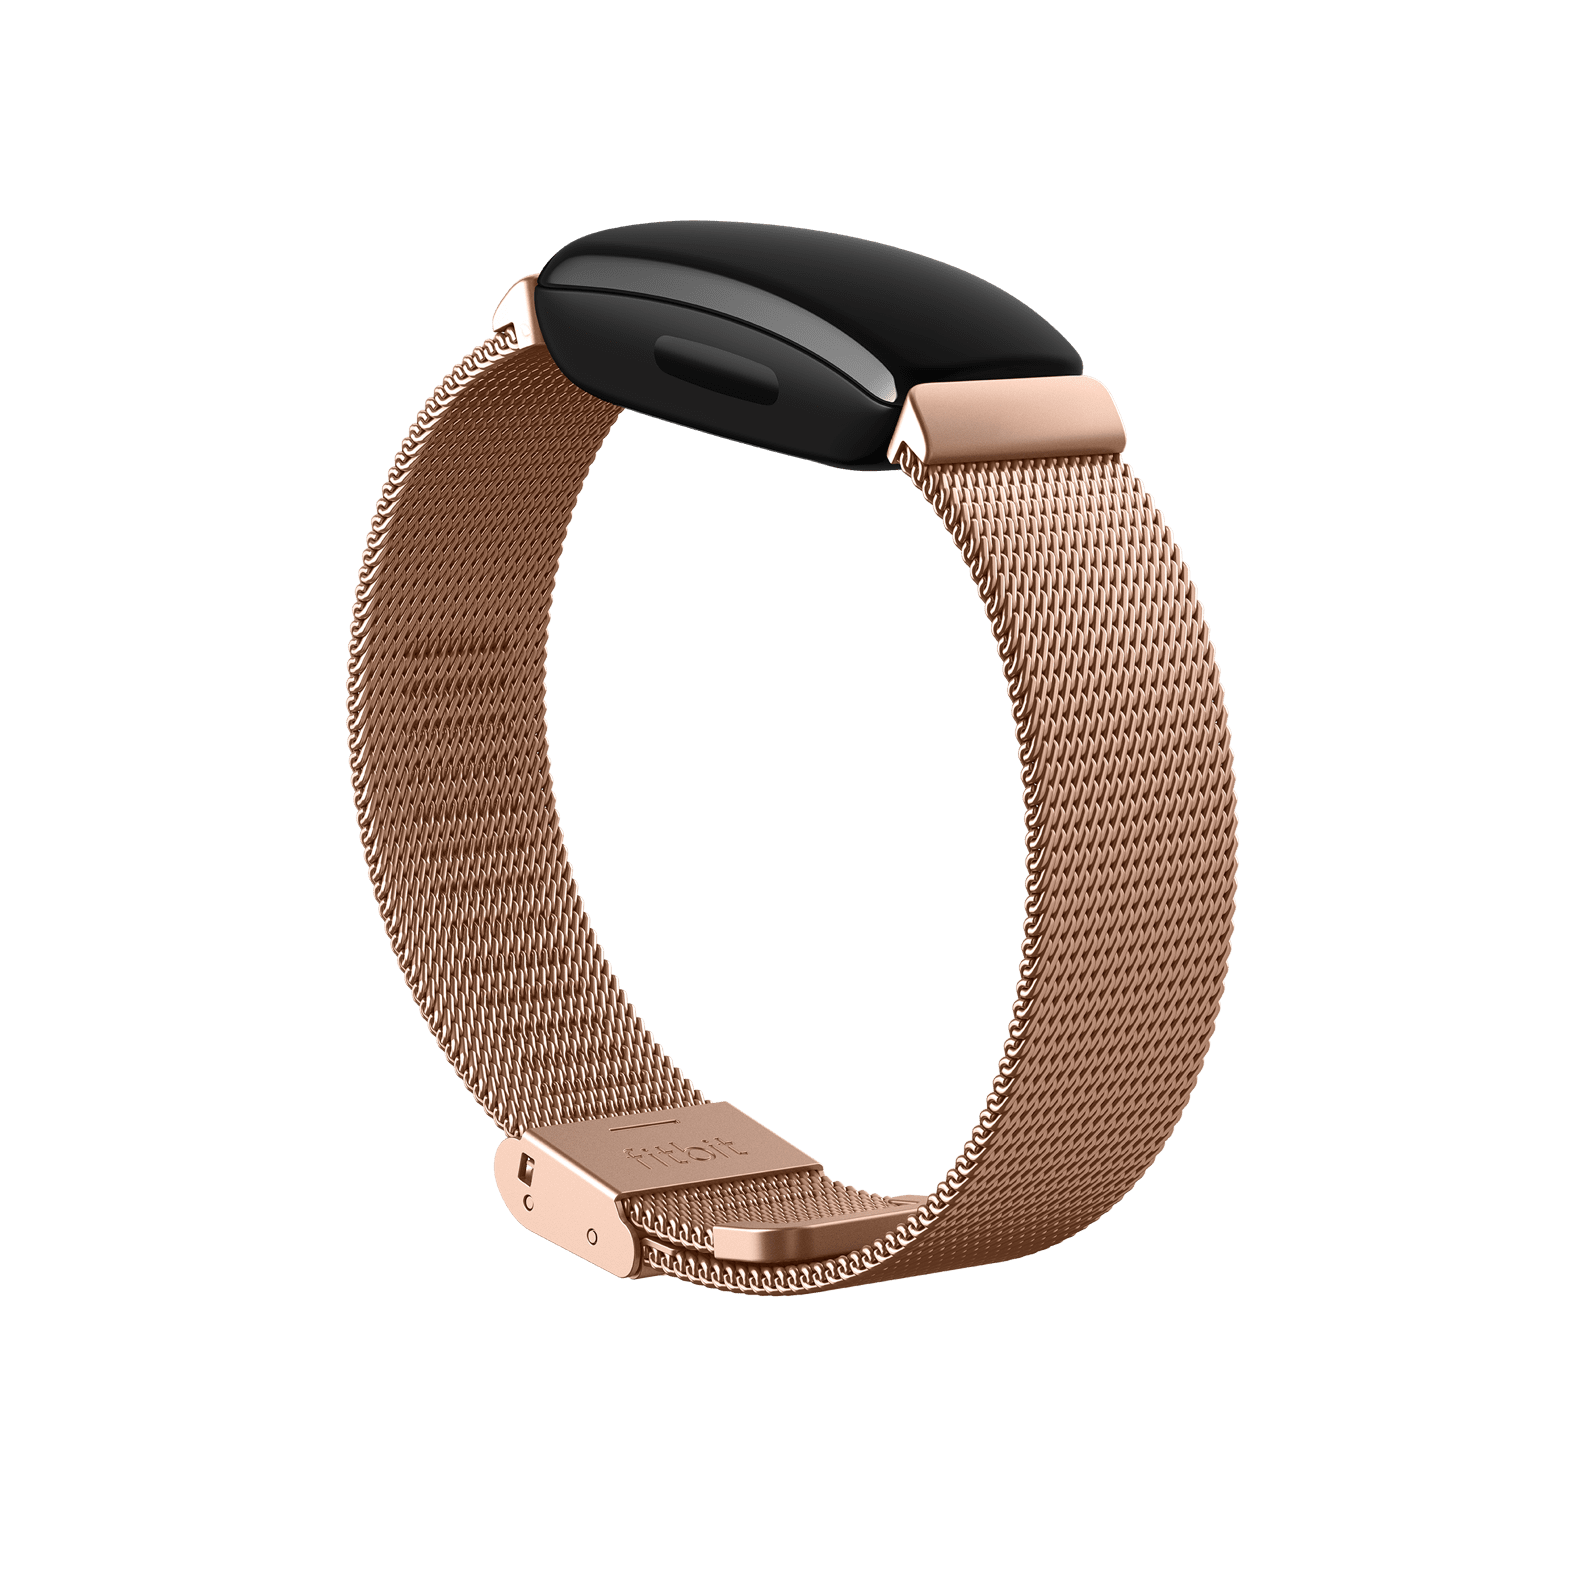 fitbit steel band